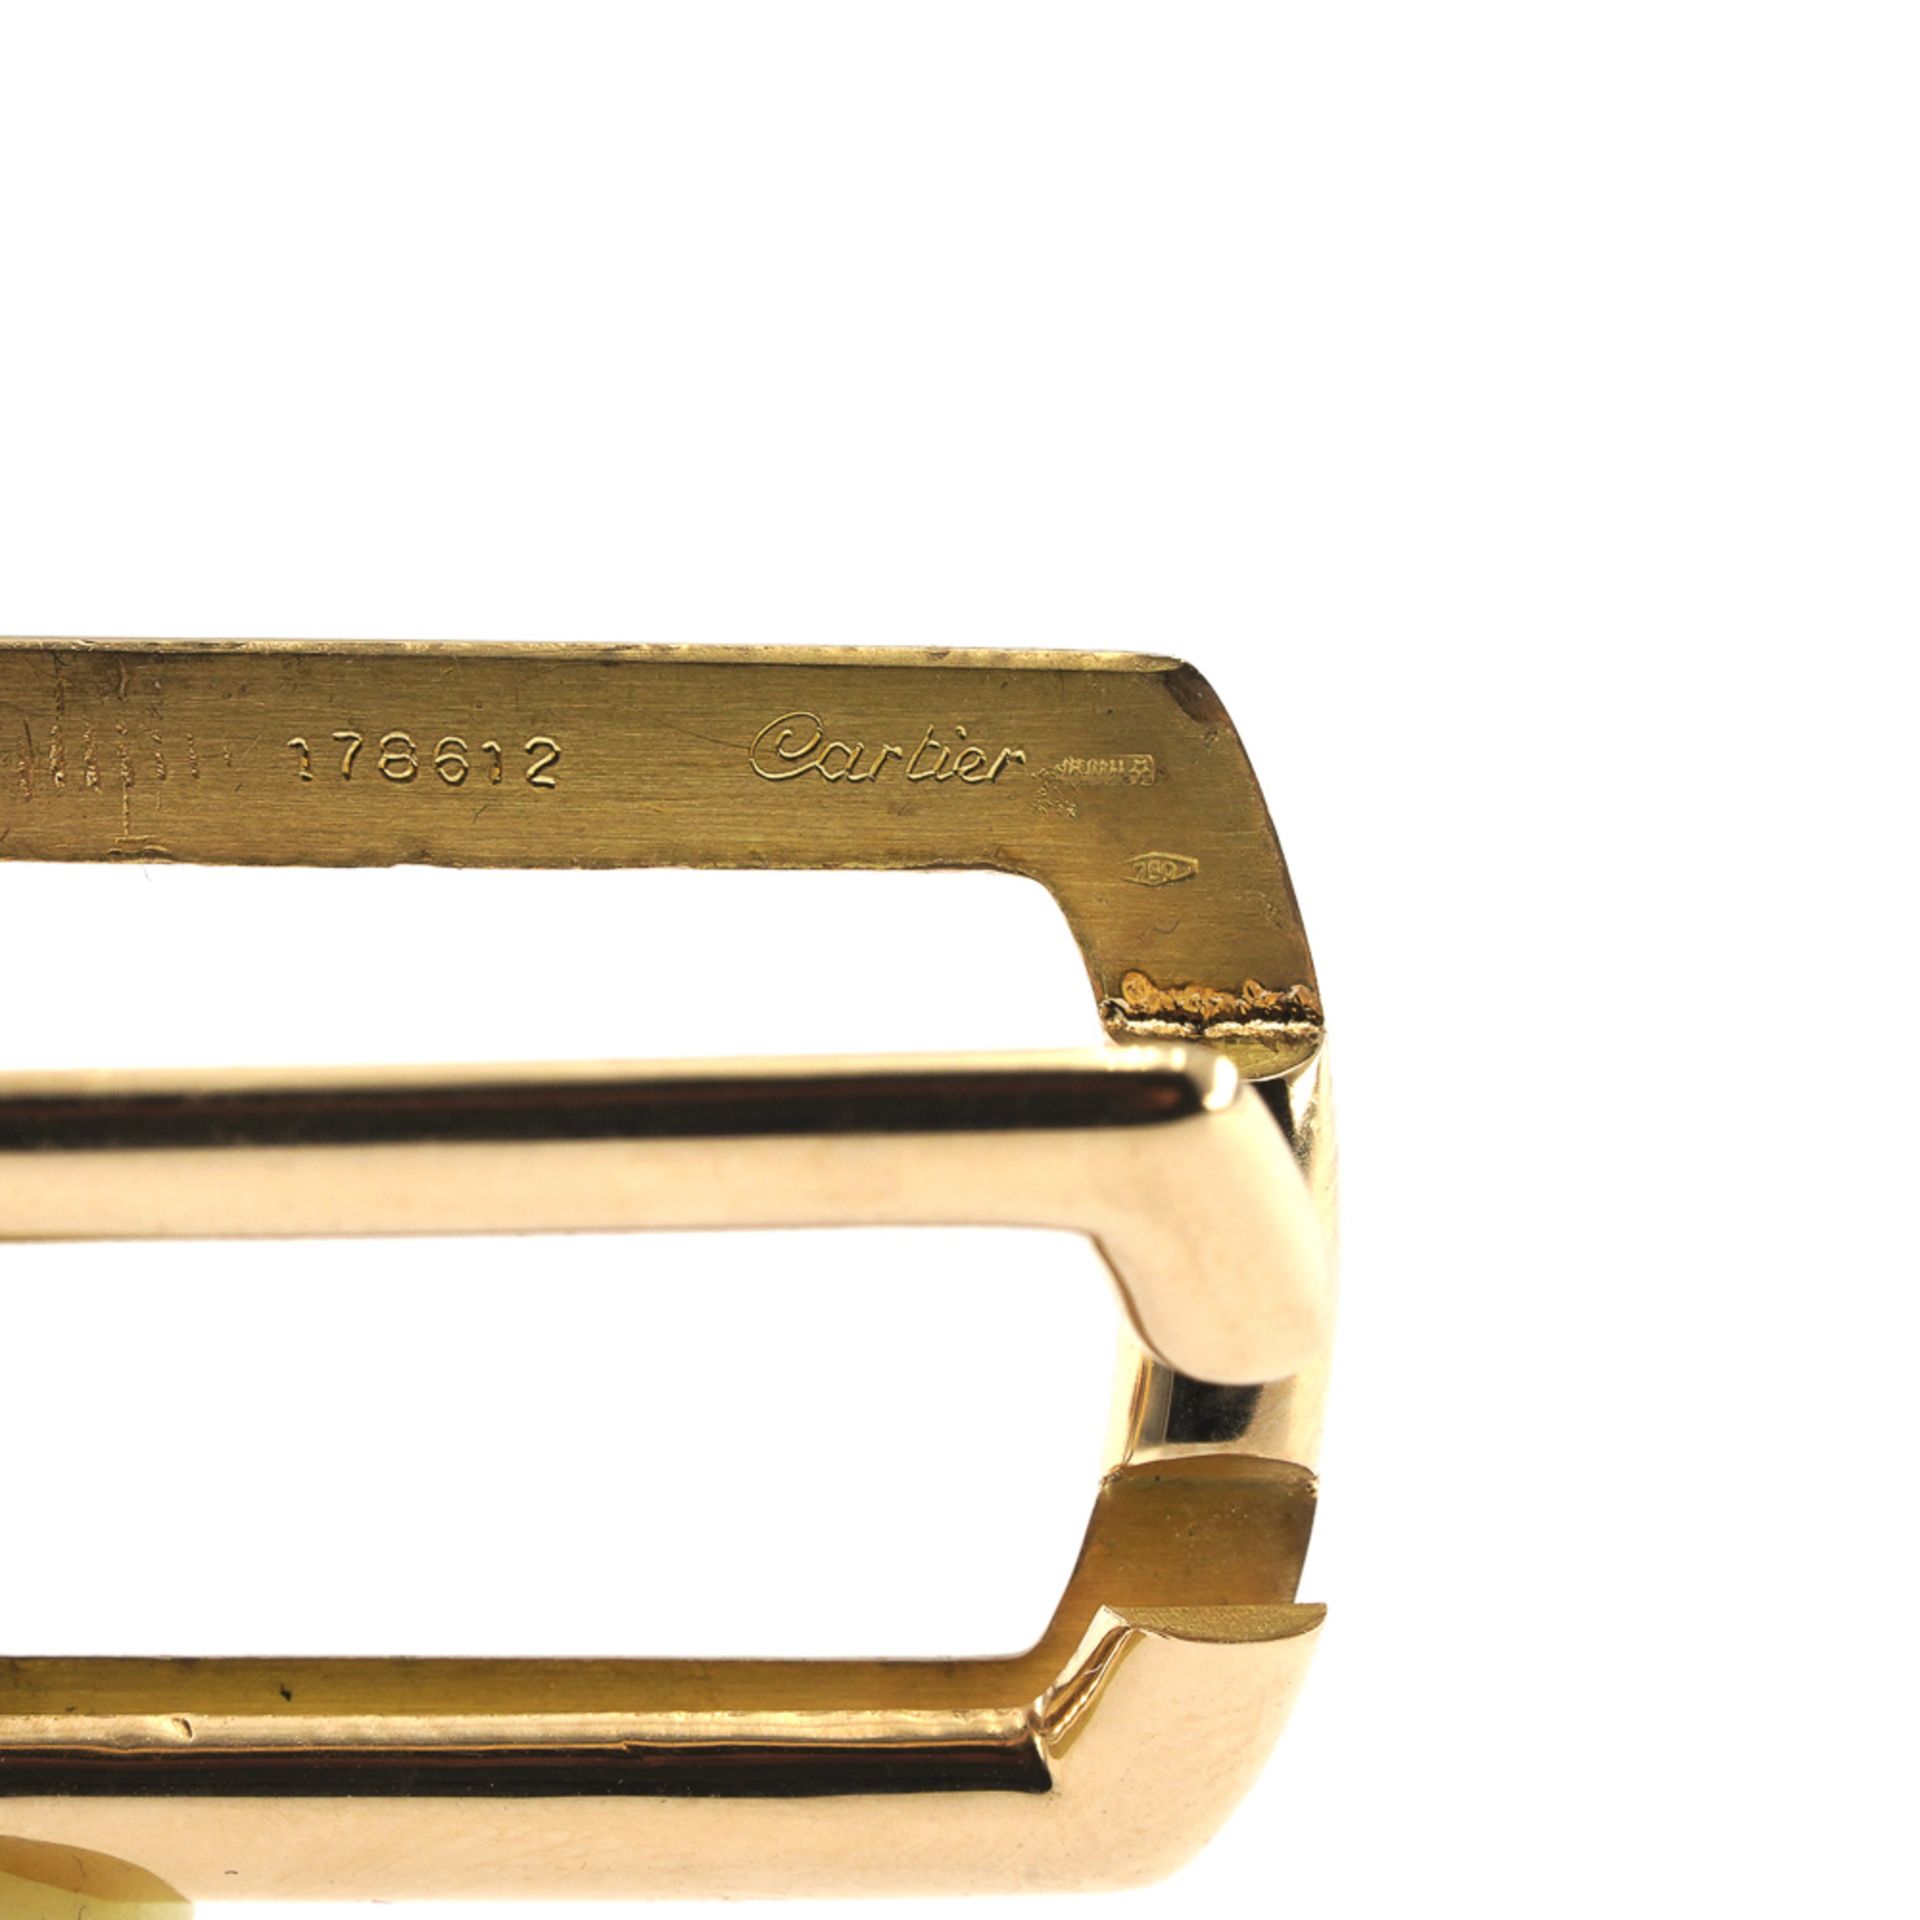 Cartier 18kt yellow gold key ring - Image 3 of 3